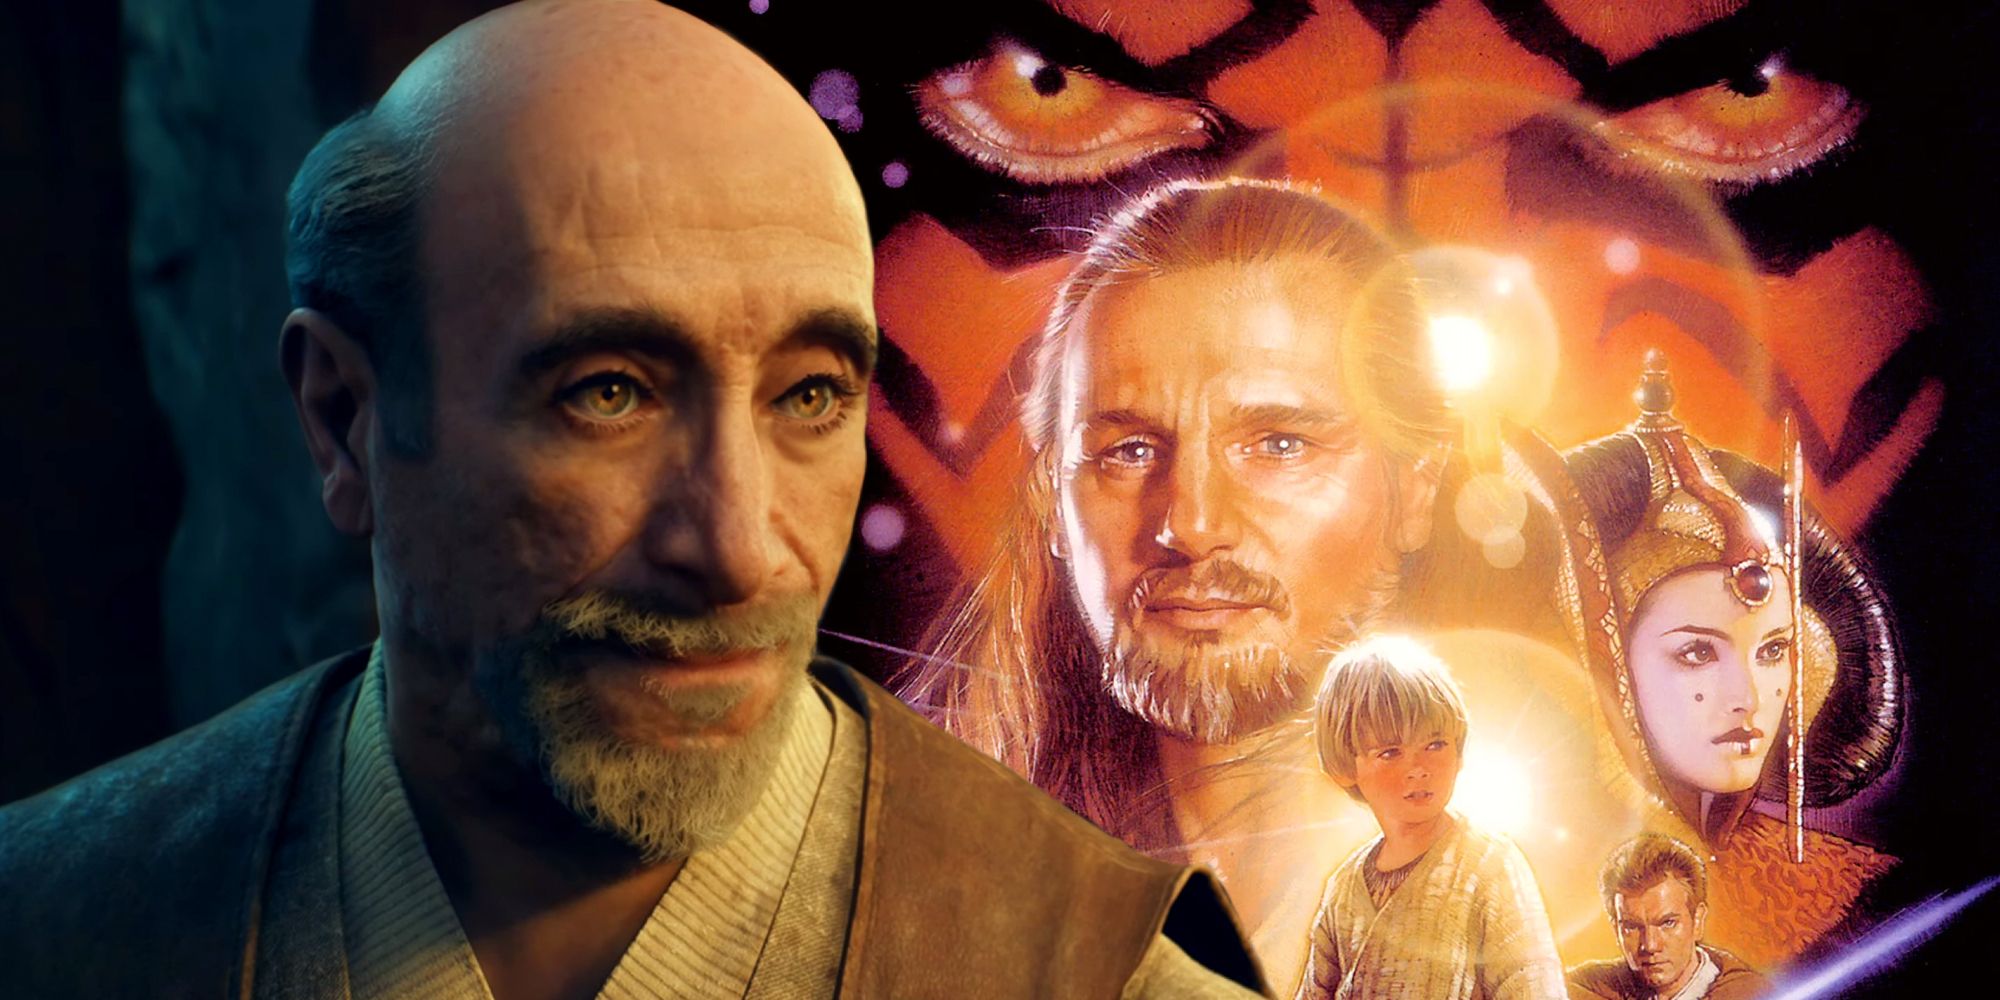 Jedi Master Eno Cordova from Star Wars Jedi: Survivor next to the poster art for The Phantom Menace, showing Qui-Gon Jinn, Anakin, Queen Amadala, and Obi-Wan Kenobi in front of Darth Maul's face.